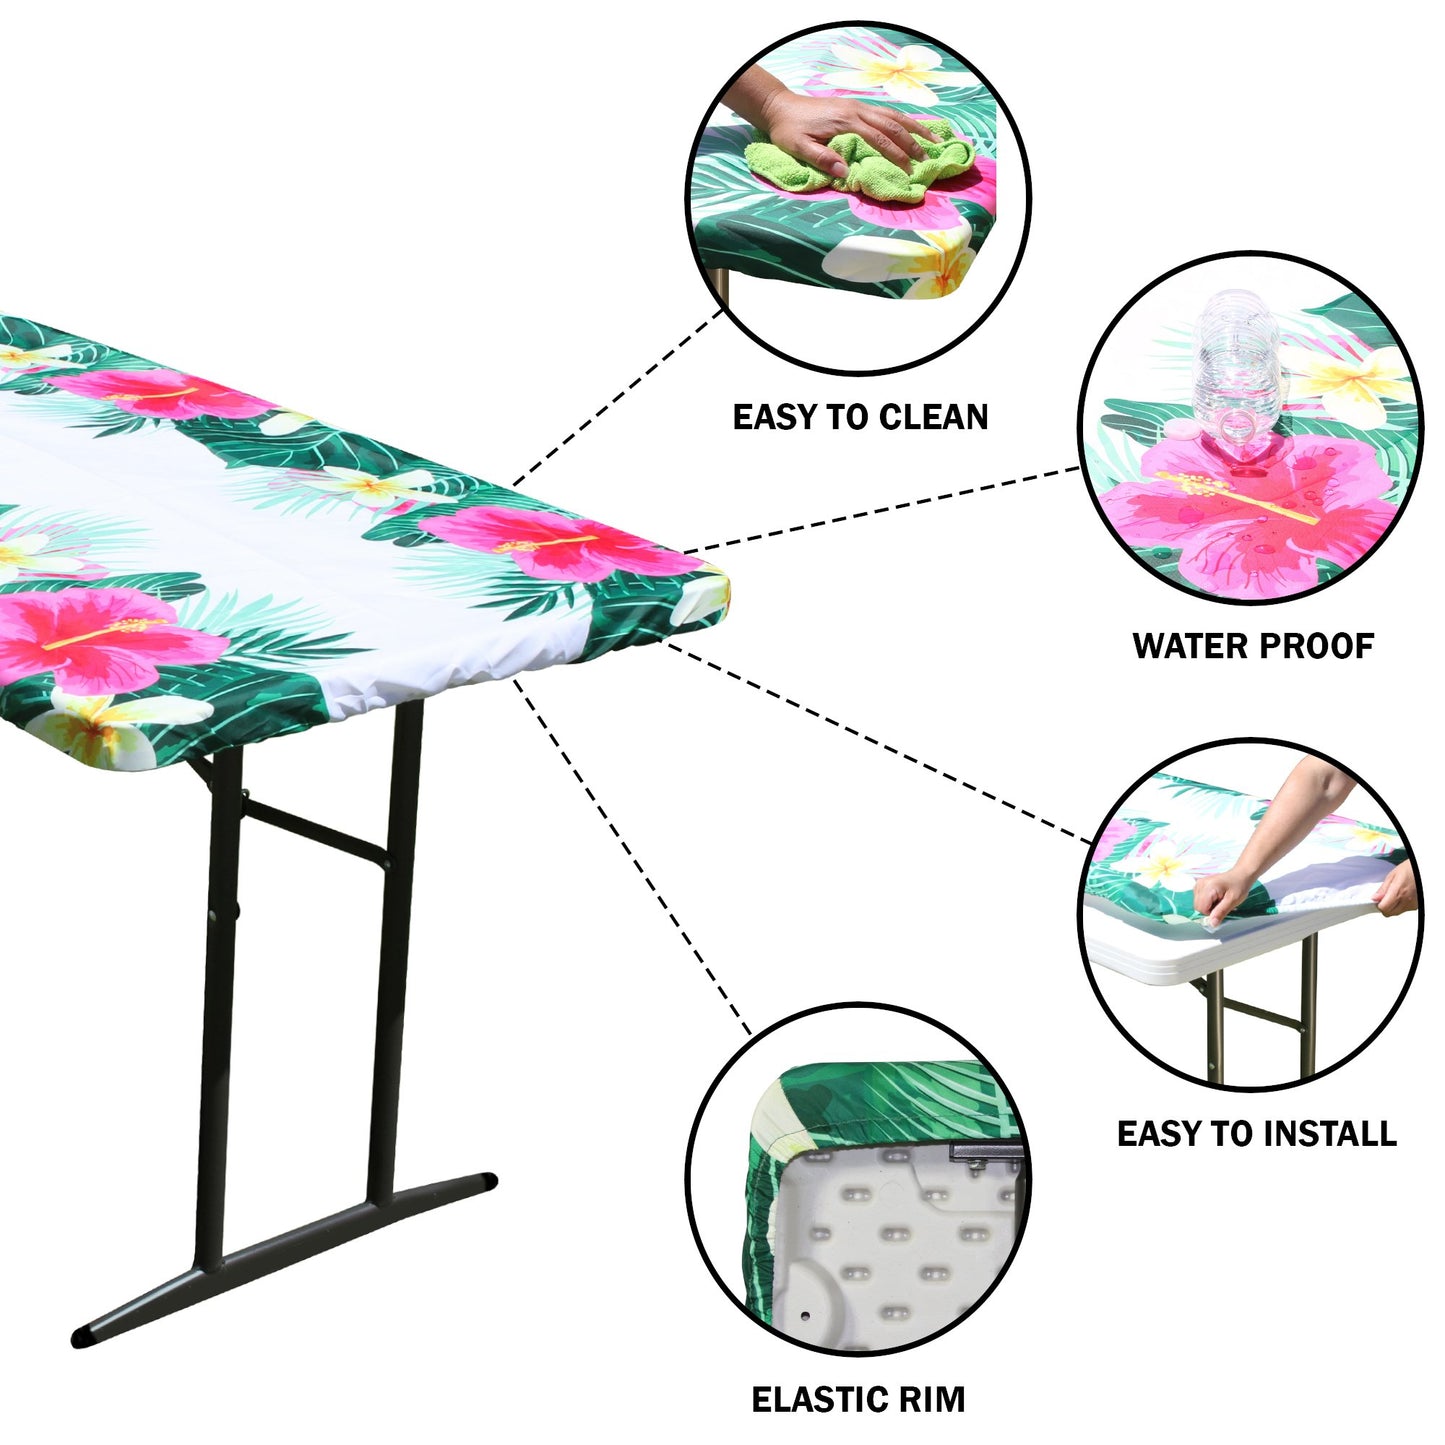 TableCloth PLUS 72" Summer Fitted Polyester Tablecloth for 6' Folding Tables is easy to clean, water proof, easy to install, and has an elastic rim